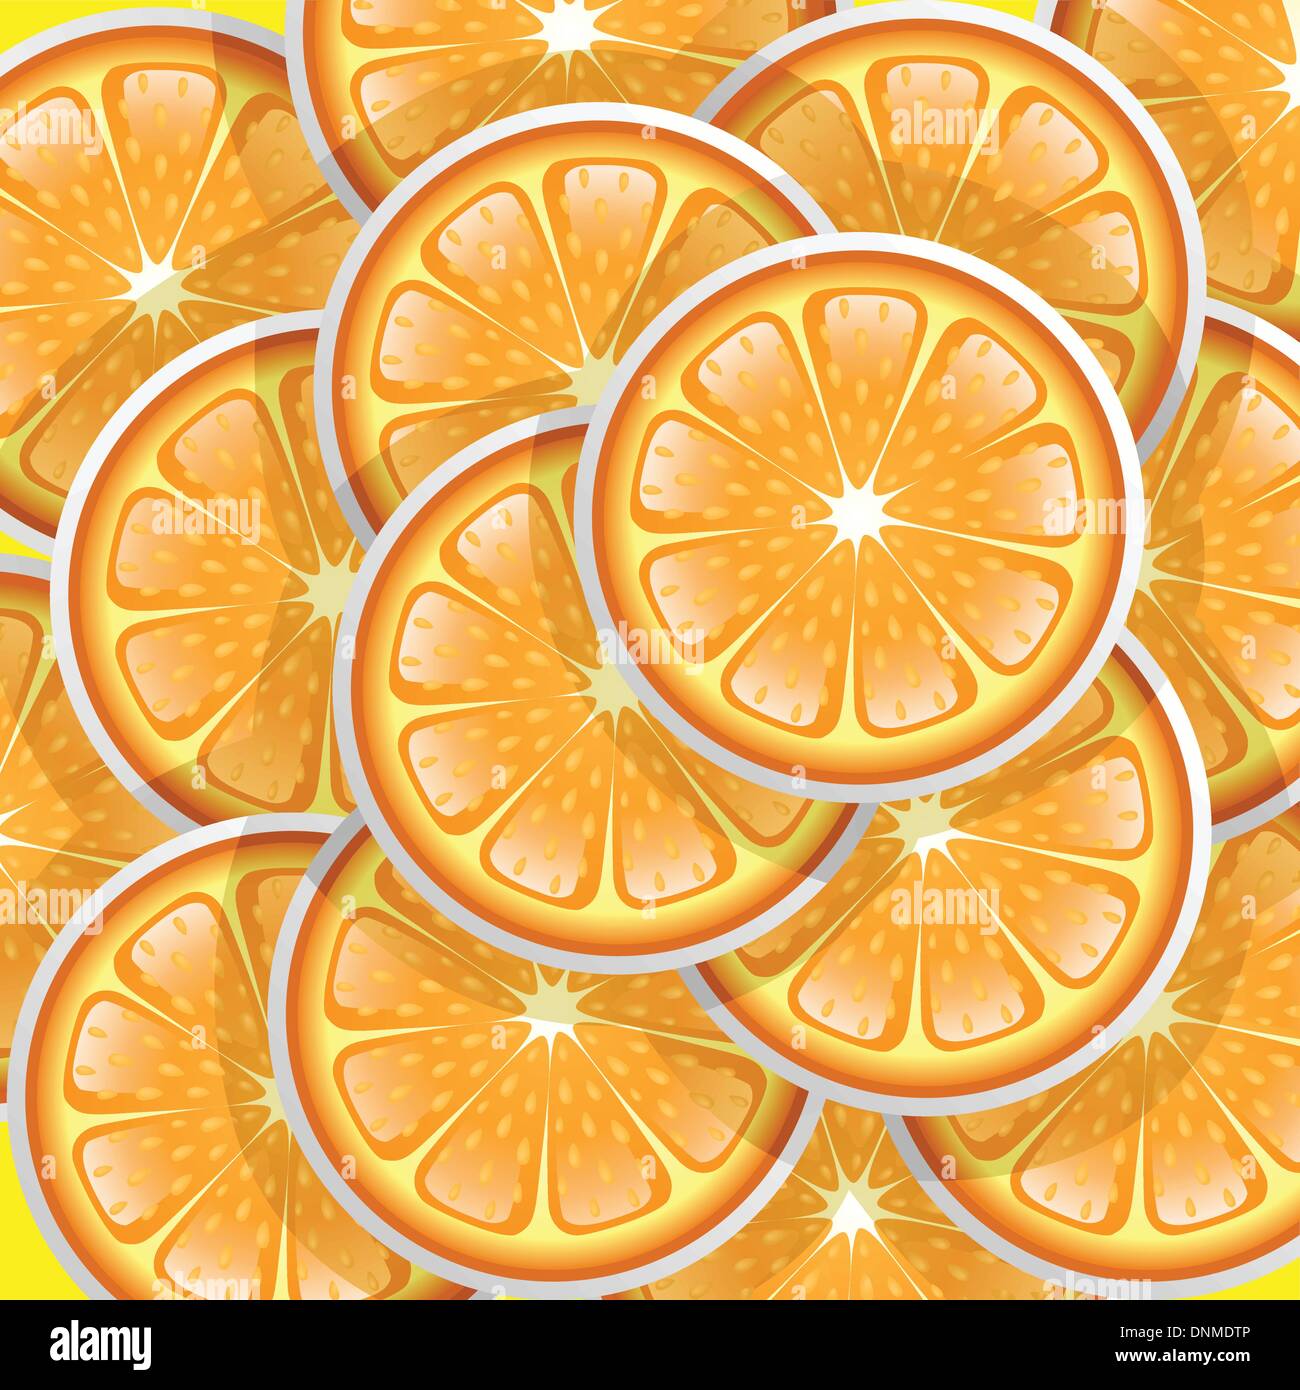 A vector illustration of oranges slices pattern Stock Vector